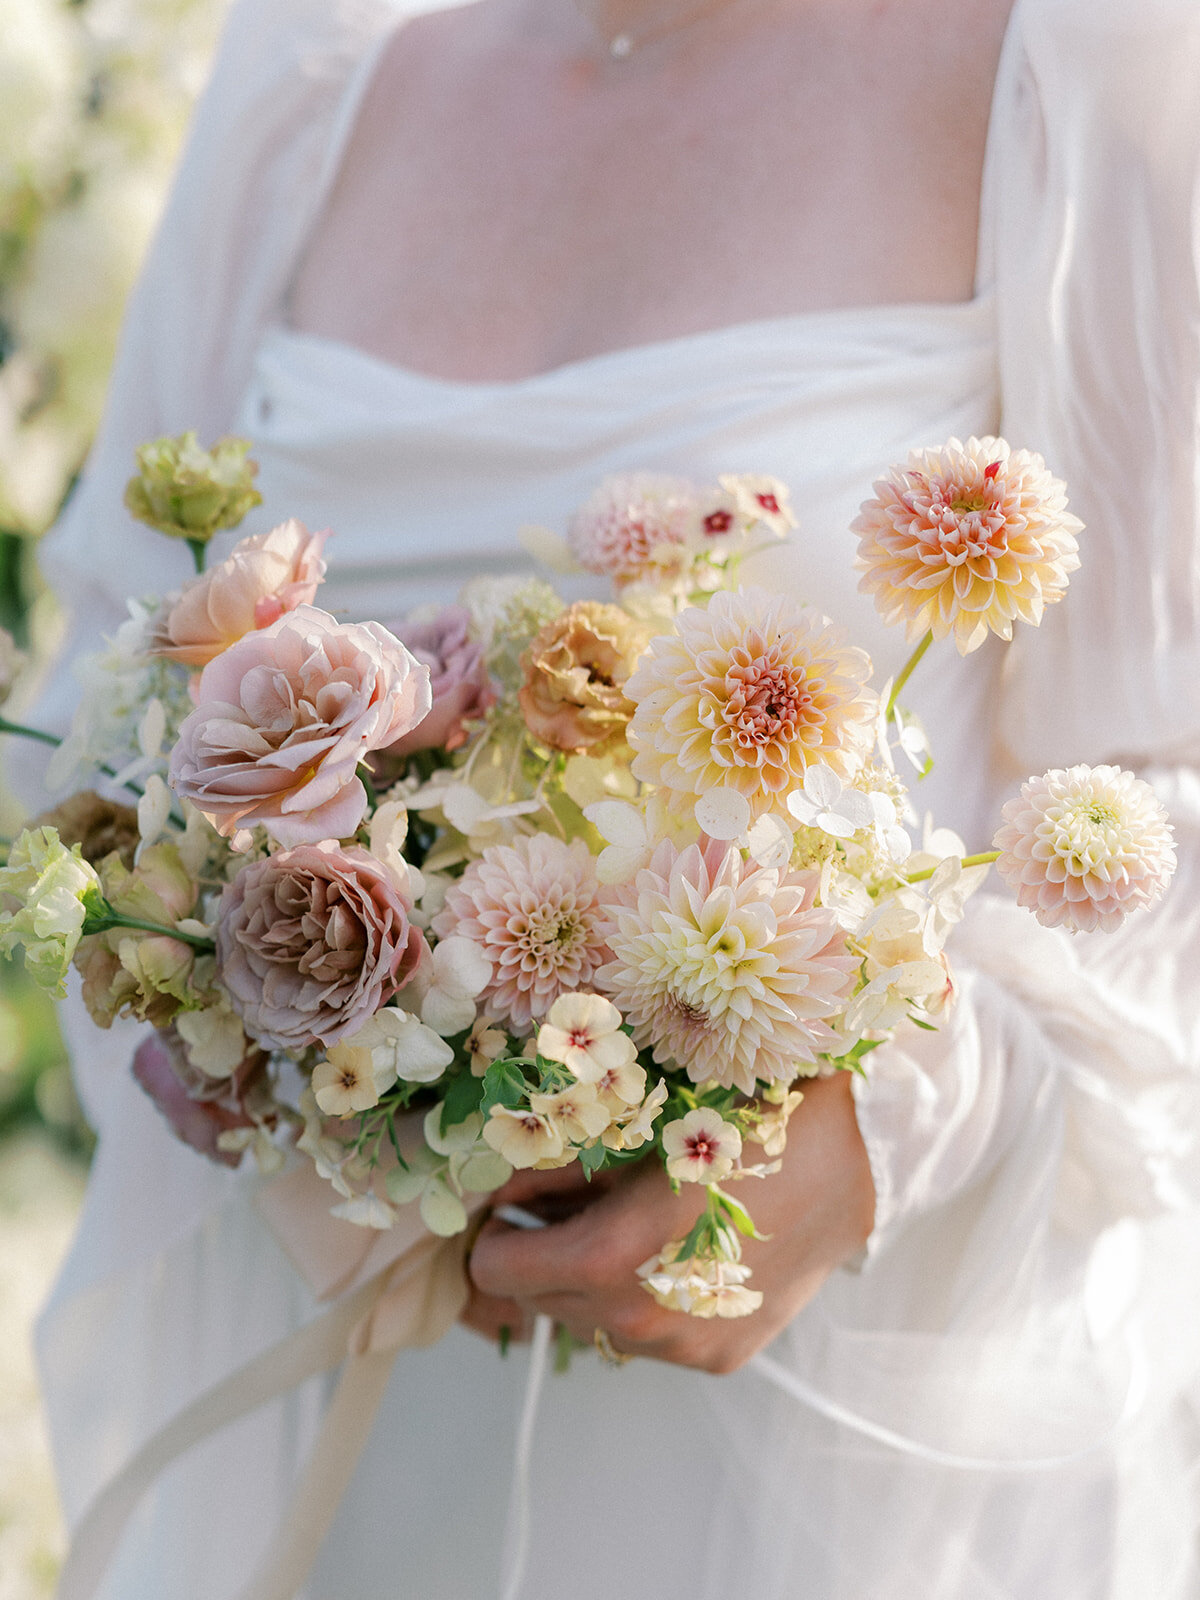 Bridal bouquet including blush garden roses, taupe garden roses, blush dahlias, peach dahlias, peach lisianthus, phlox, and white hydrangea.